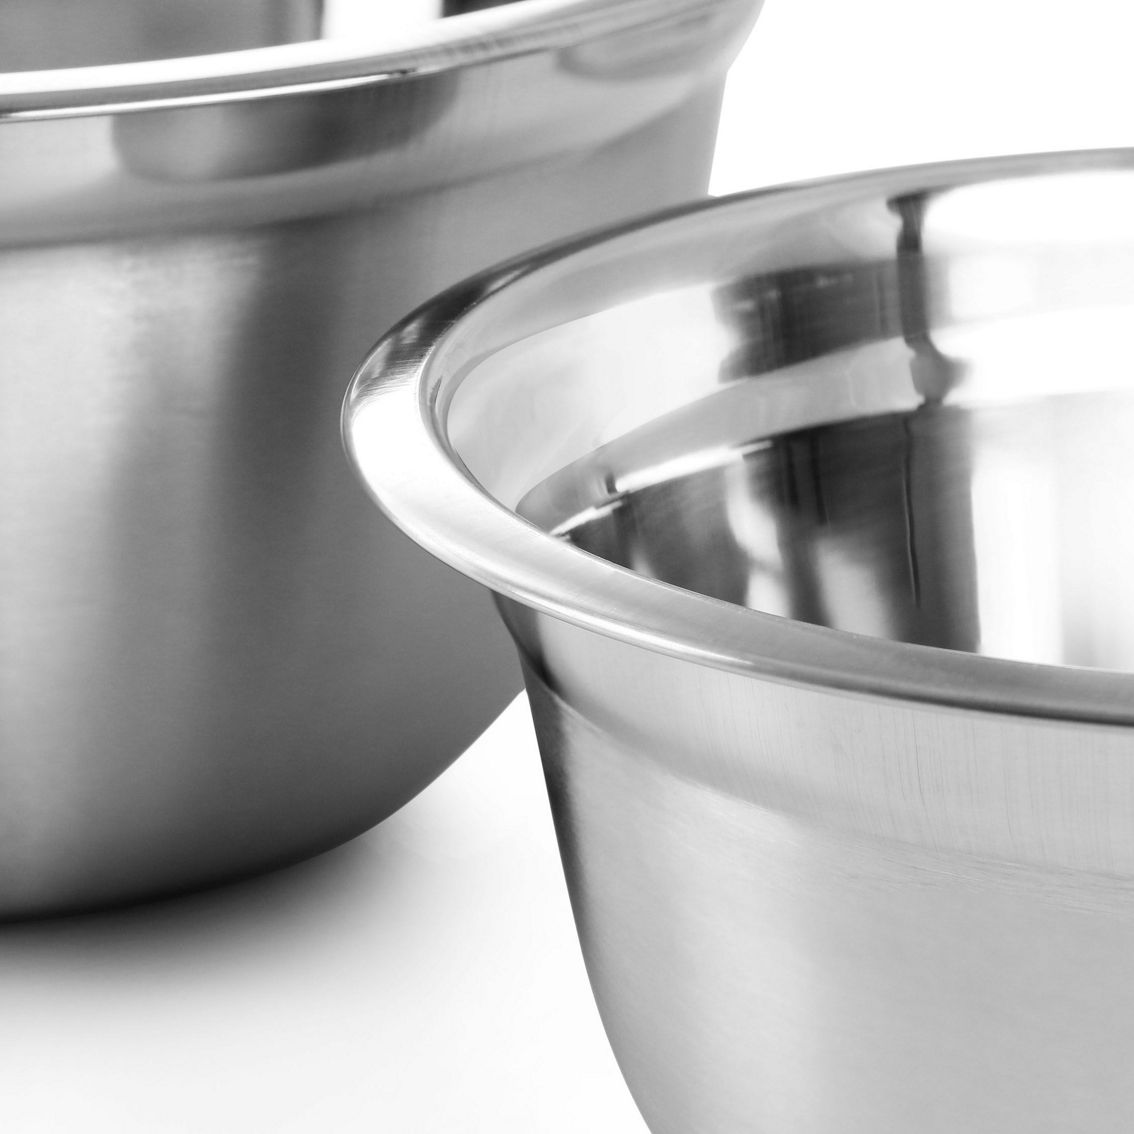 Oster Rosamond 3 Piece Stainless Steel Mixing Bowl Set in Silver - Image 4 of 5